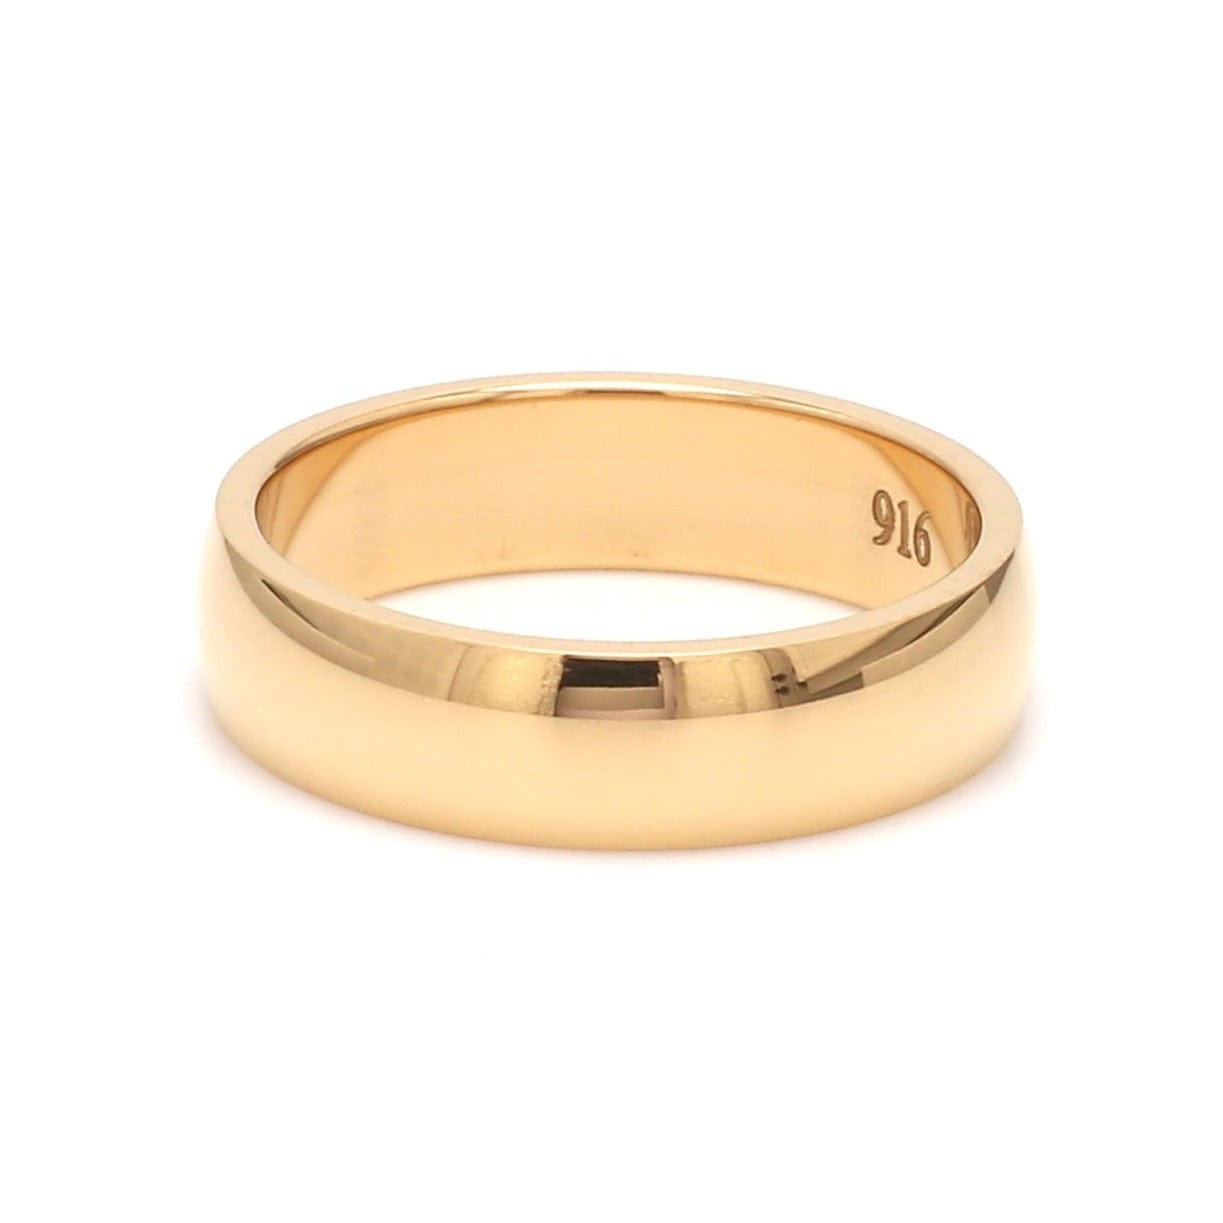 22kt Gold Classic Mens Ring - RiMs26309 - US$ 575 - 22kt Gold Classic Mens  Ring. Ring is designed with machine cuts in combination with matte finish.